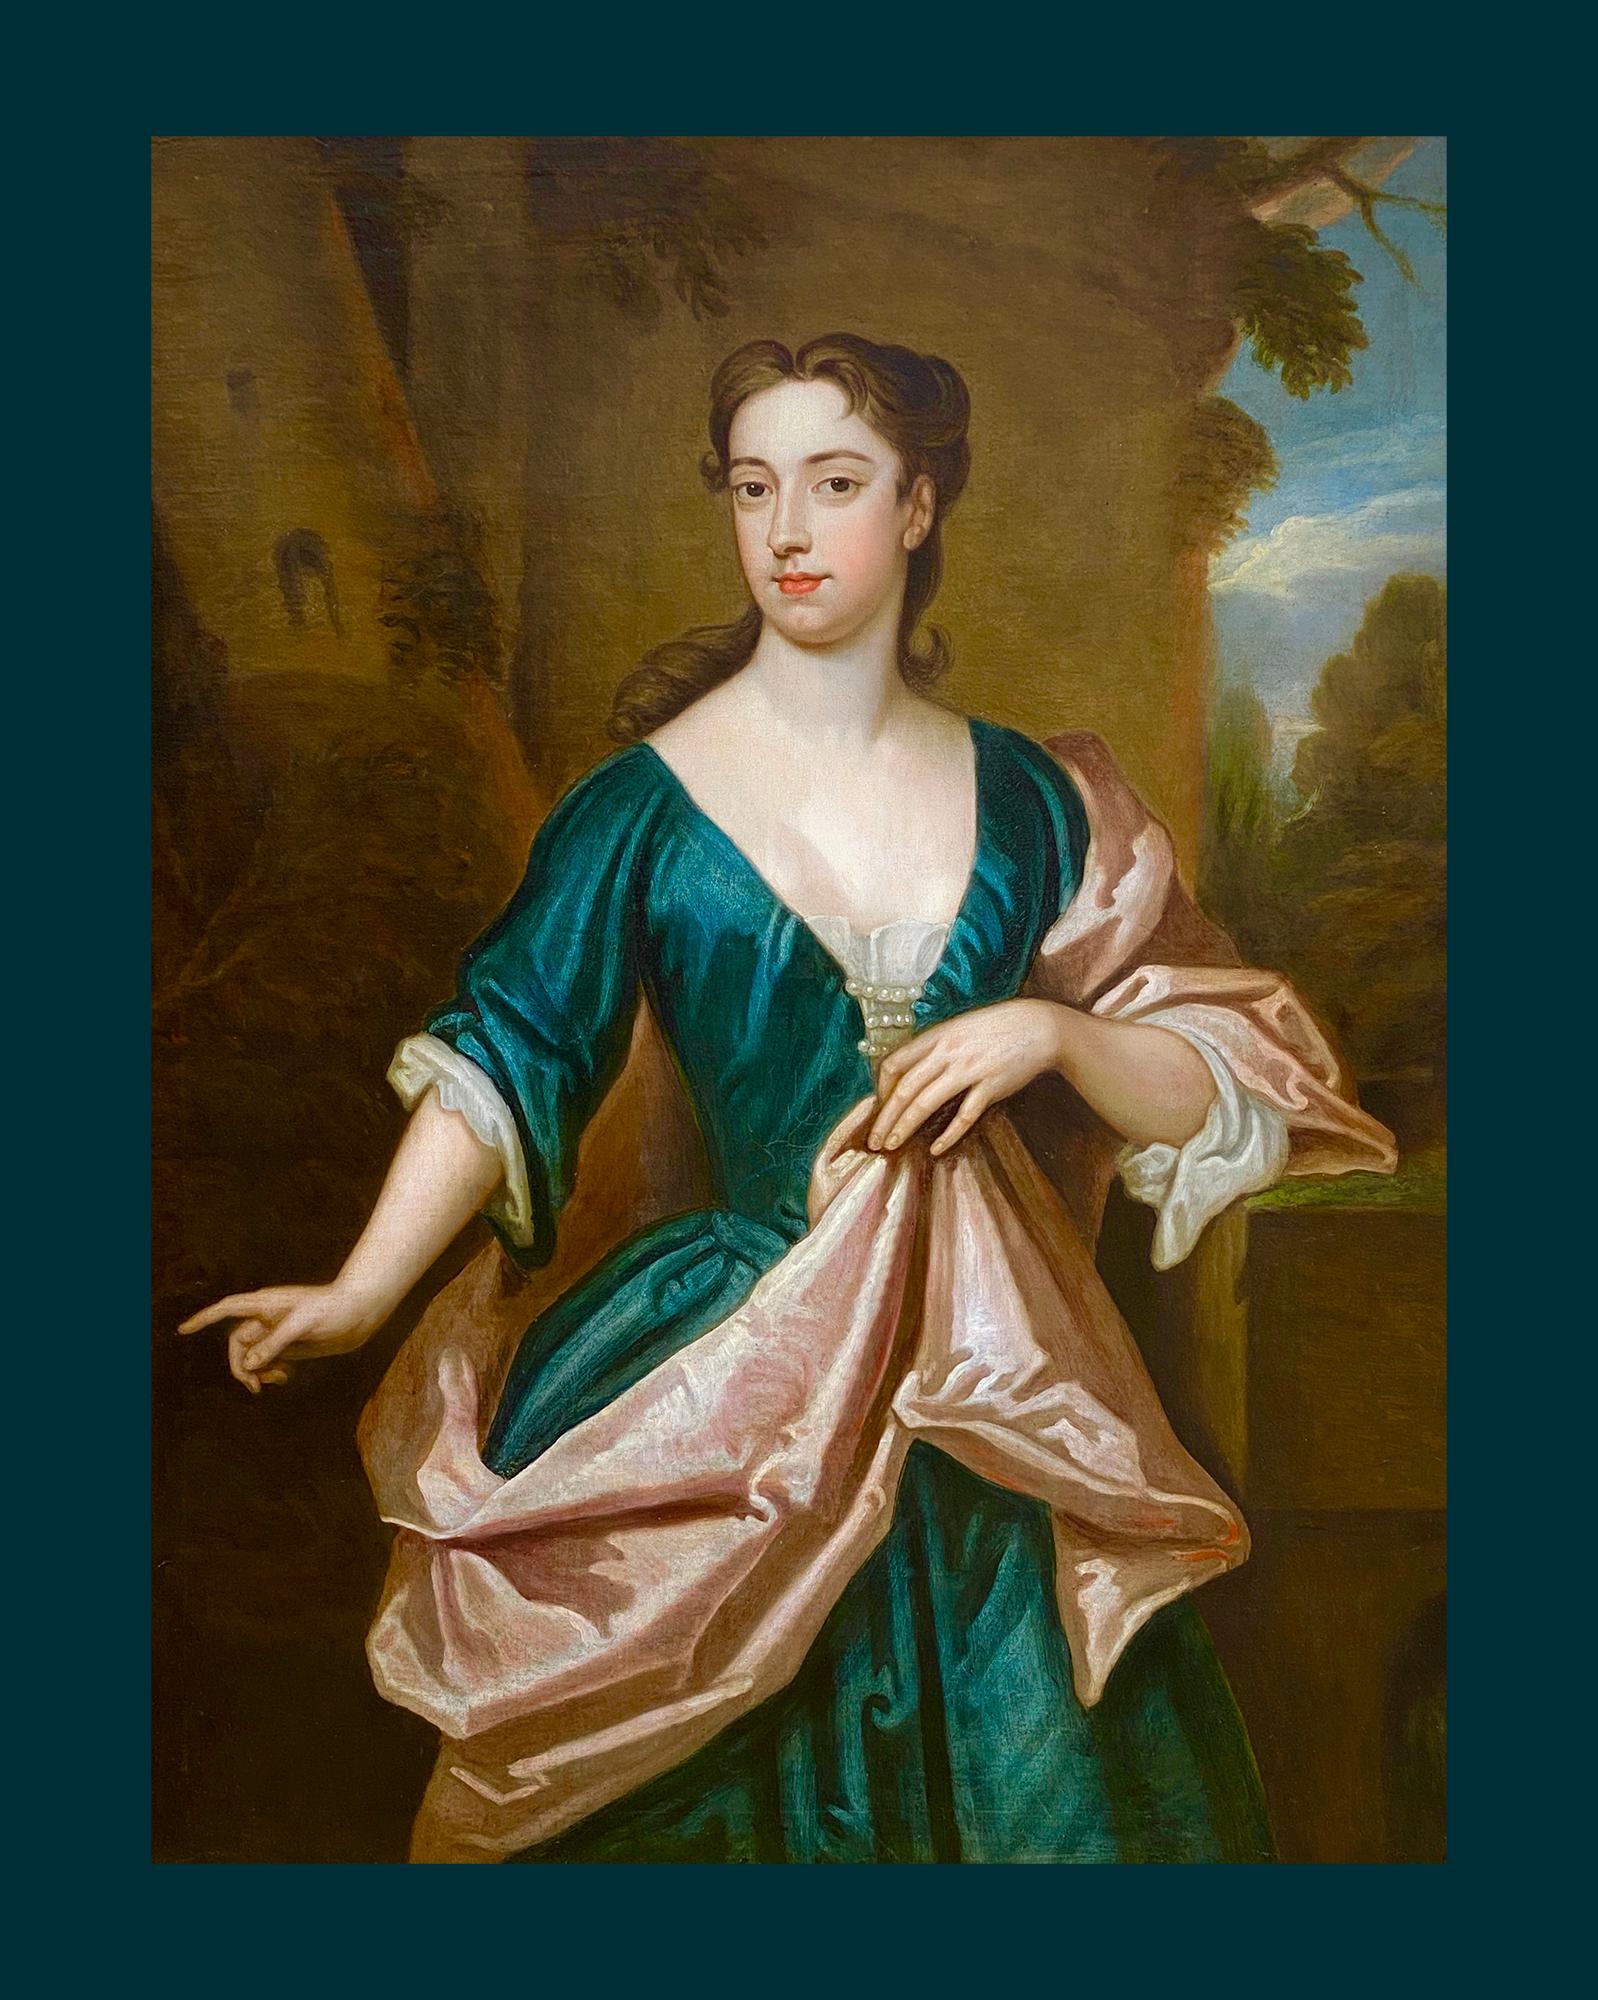 A fine, large scale and highly decorative early eighteenth century portrait of Charlotte Louise von Munchhausen also known as Charlotte von Neuhaus-Leitzkau painted by an artist in the circle of Sir Godfrey Kneller (1646 - 1723) 

The sitter is